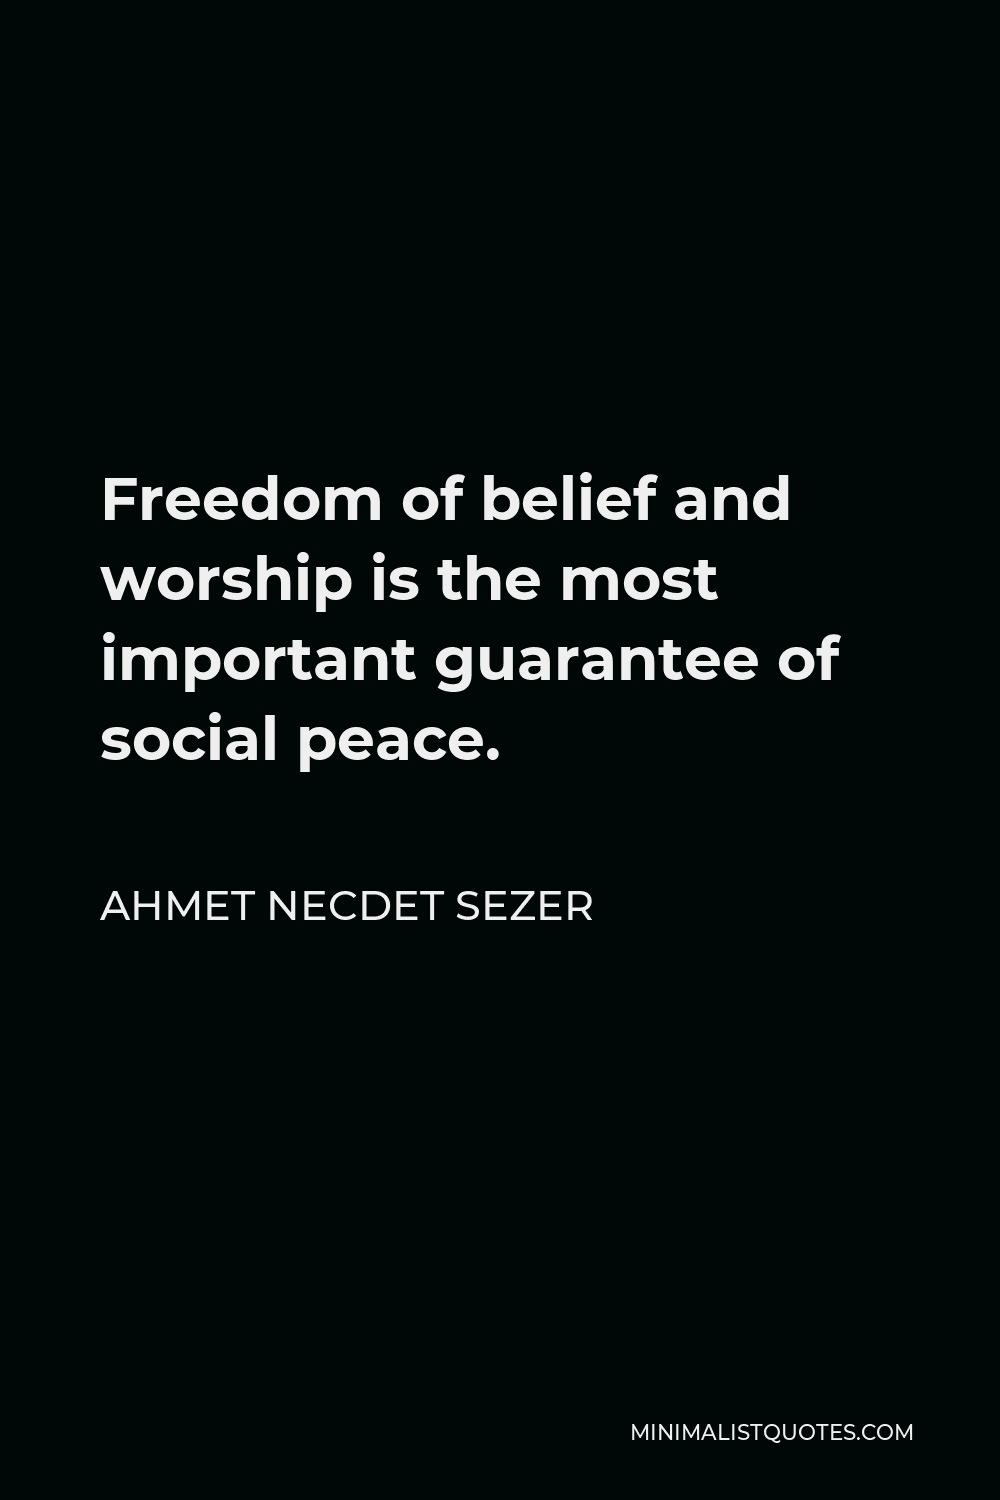 Ahmet Necdet Sezer Quote - Freedom of belief and worship is the most important guarantee of social peace.